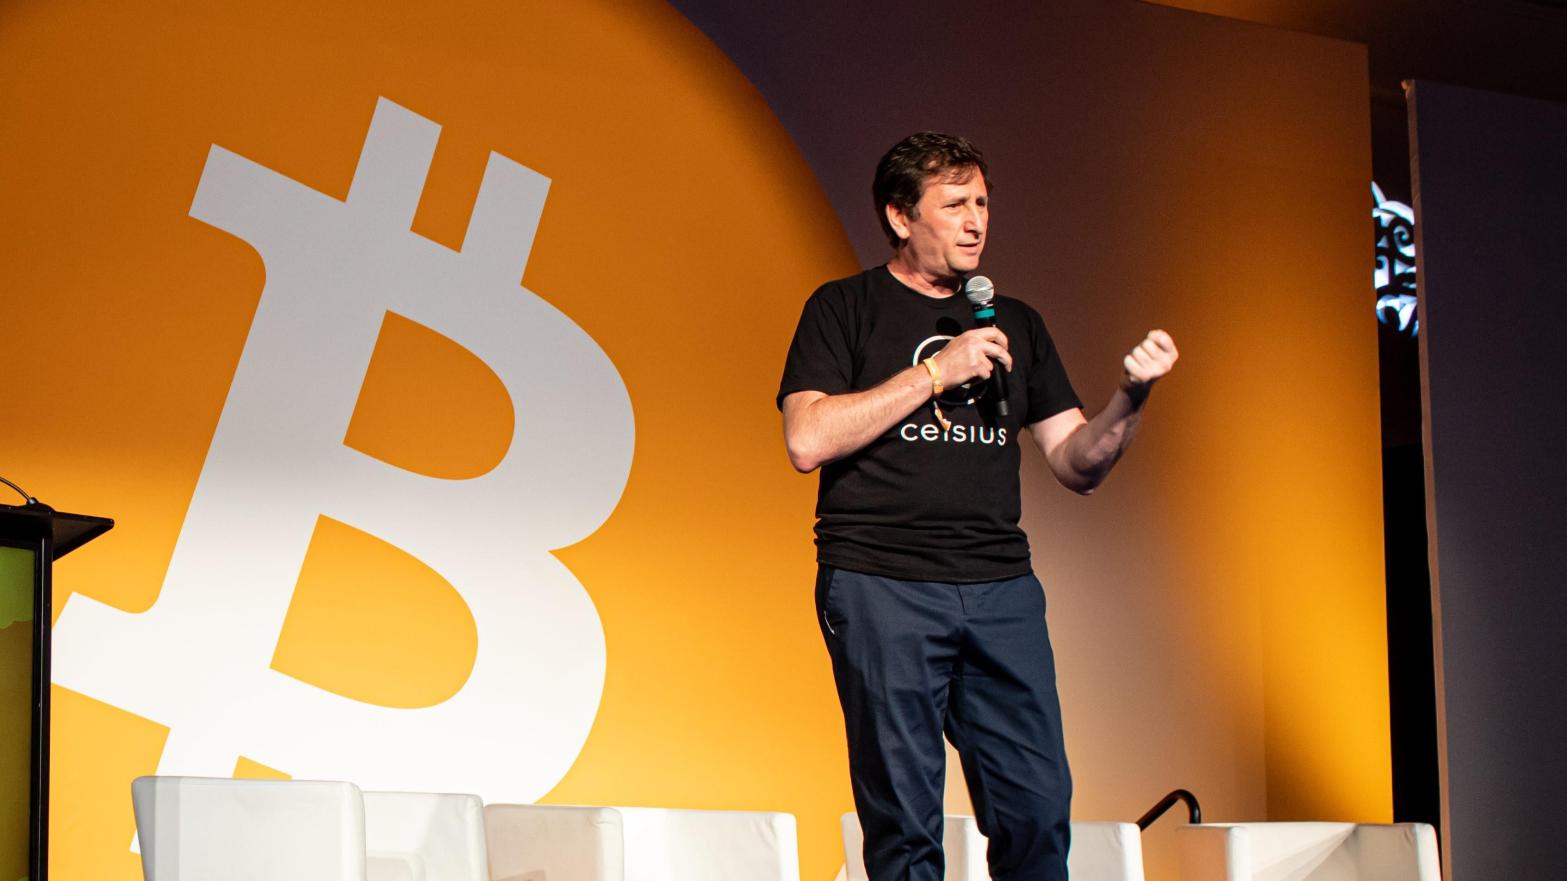 A court-appointed investigator said that Celsius' ex-CEO Alex Mashinsky had sold over $US68 ($94) million worth of the network's native CEL token since 2018, all while the network was using customer funds to prop up CEL's price. (Photo: Kevin McGovern, Shutterstock)